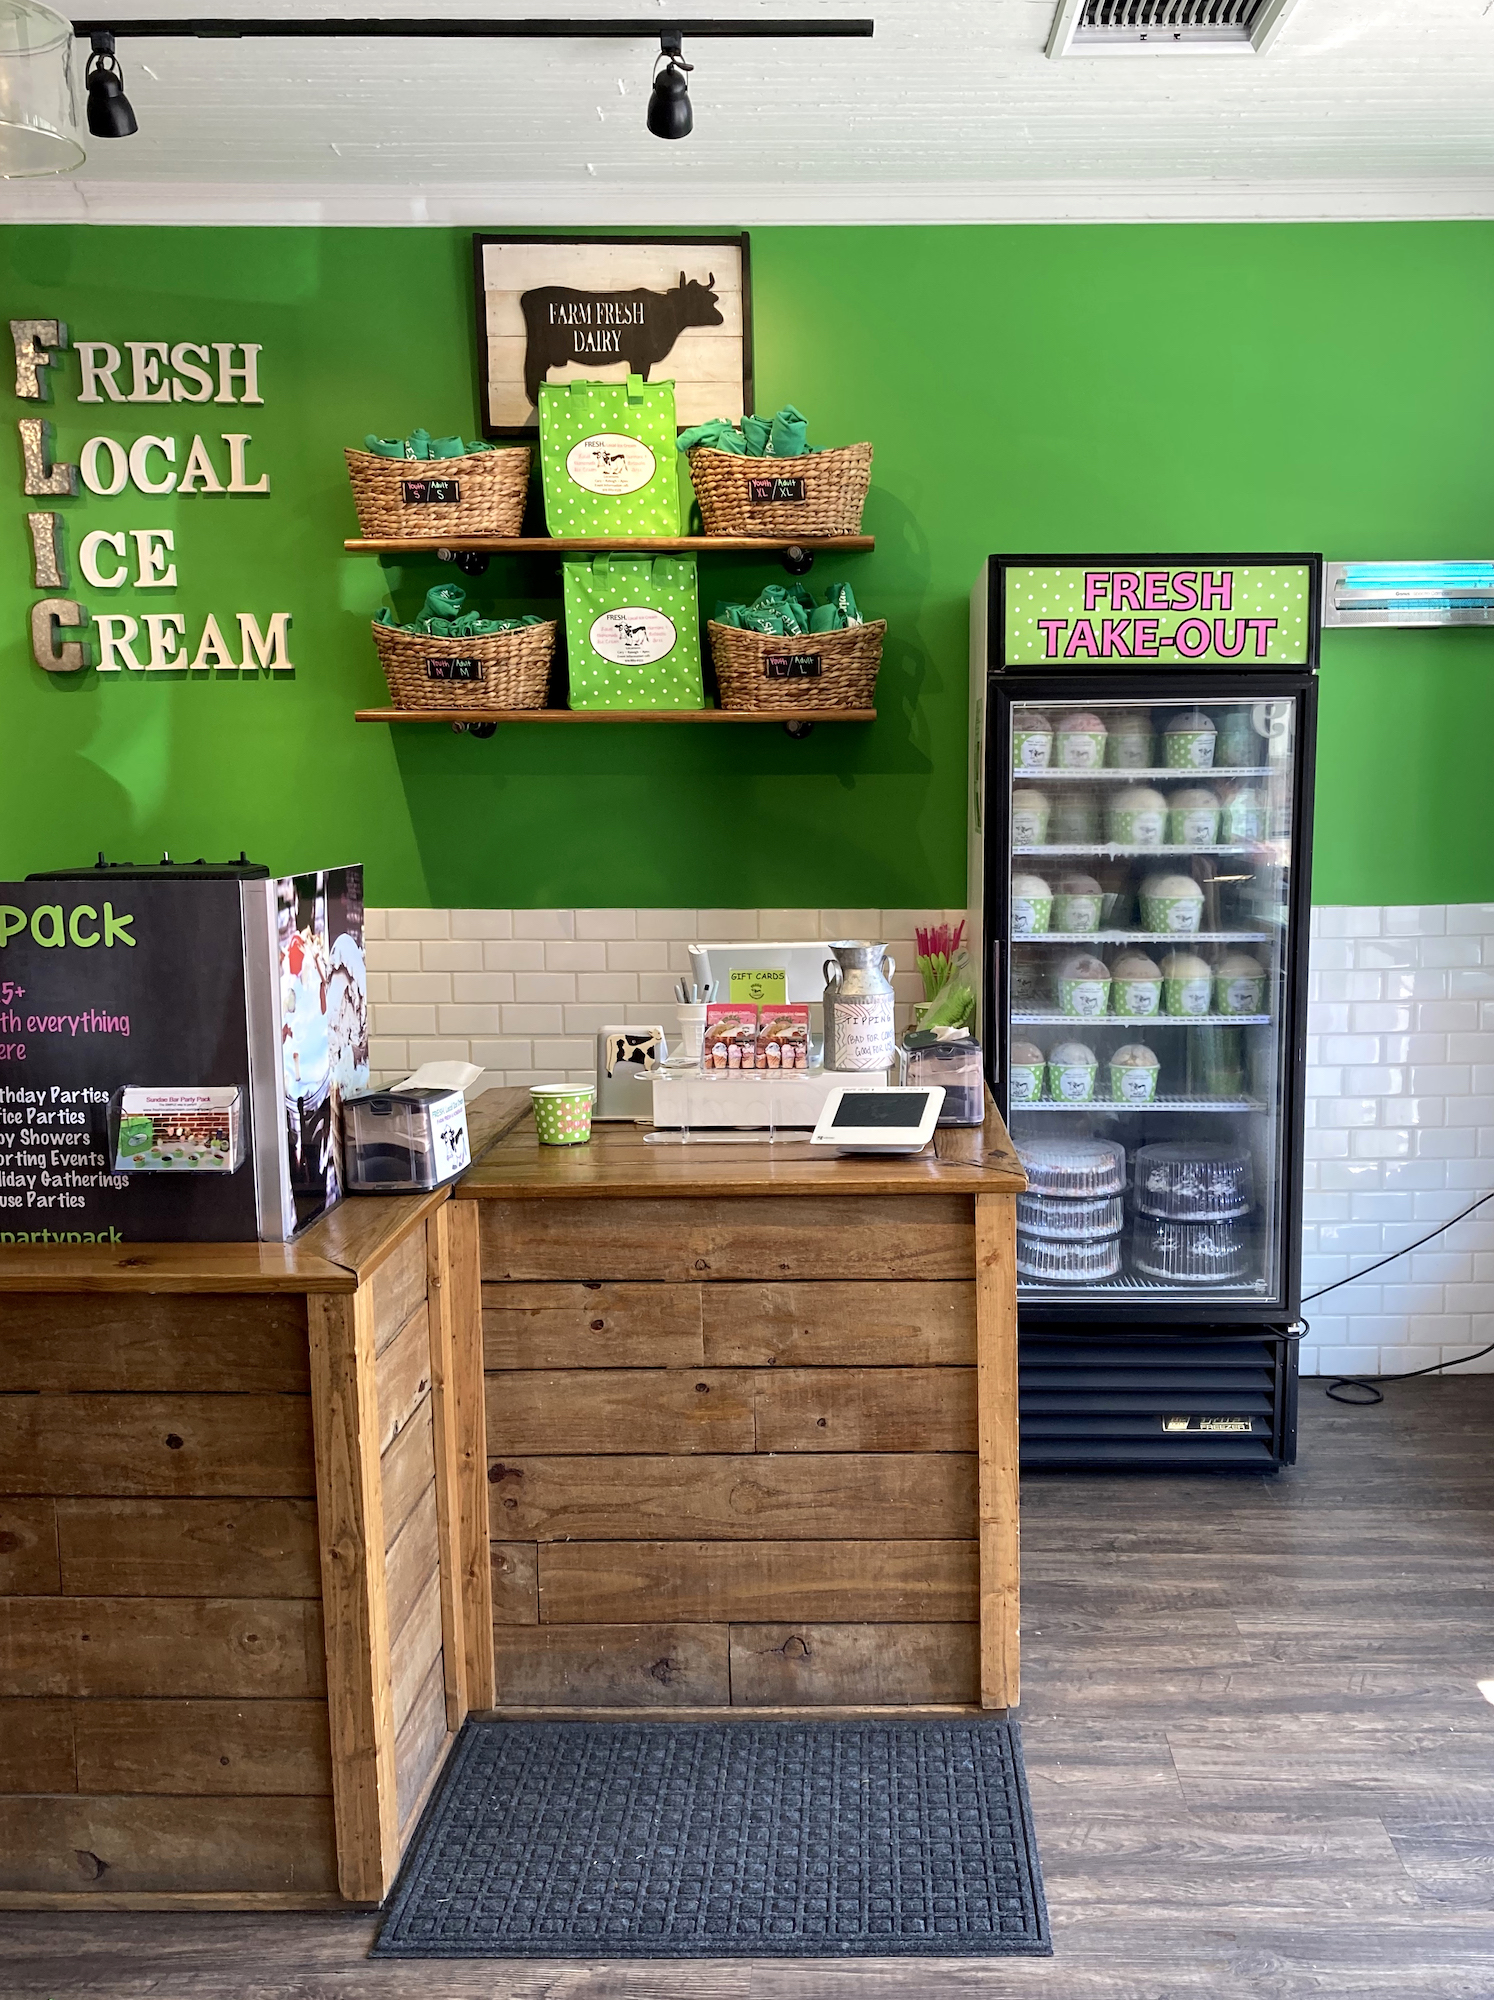 family-owned ice cream offers take home pints